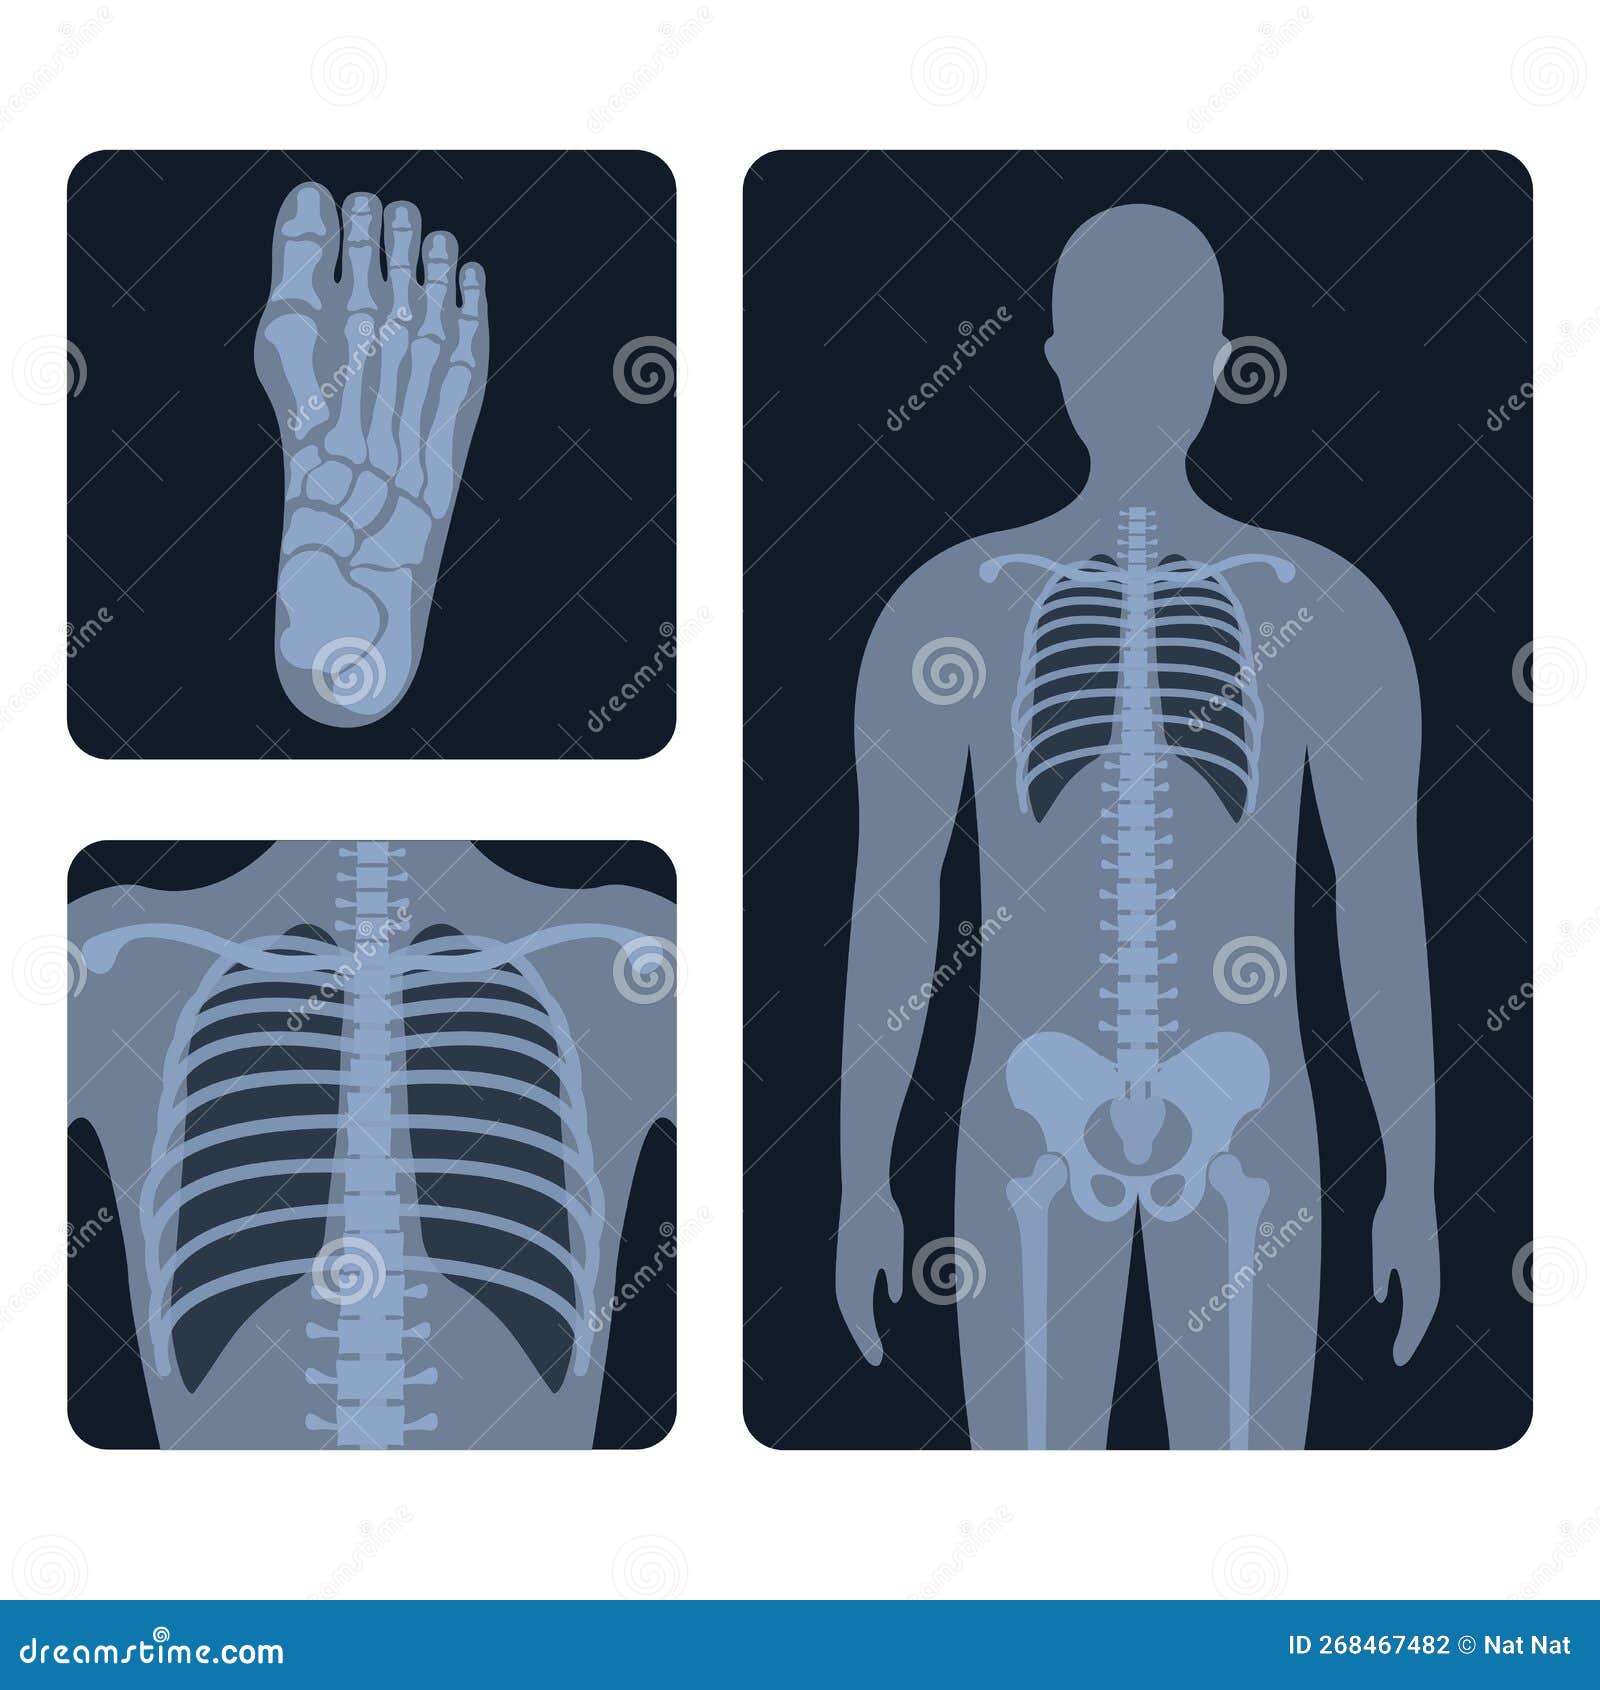 different x-ray or radiographic images of human body bones and parts